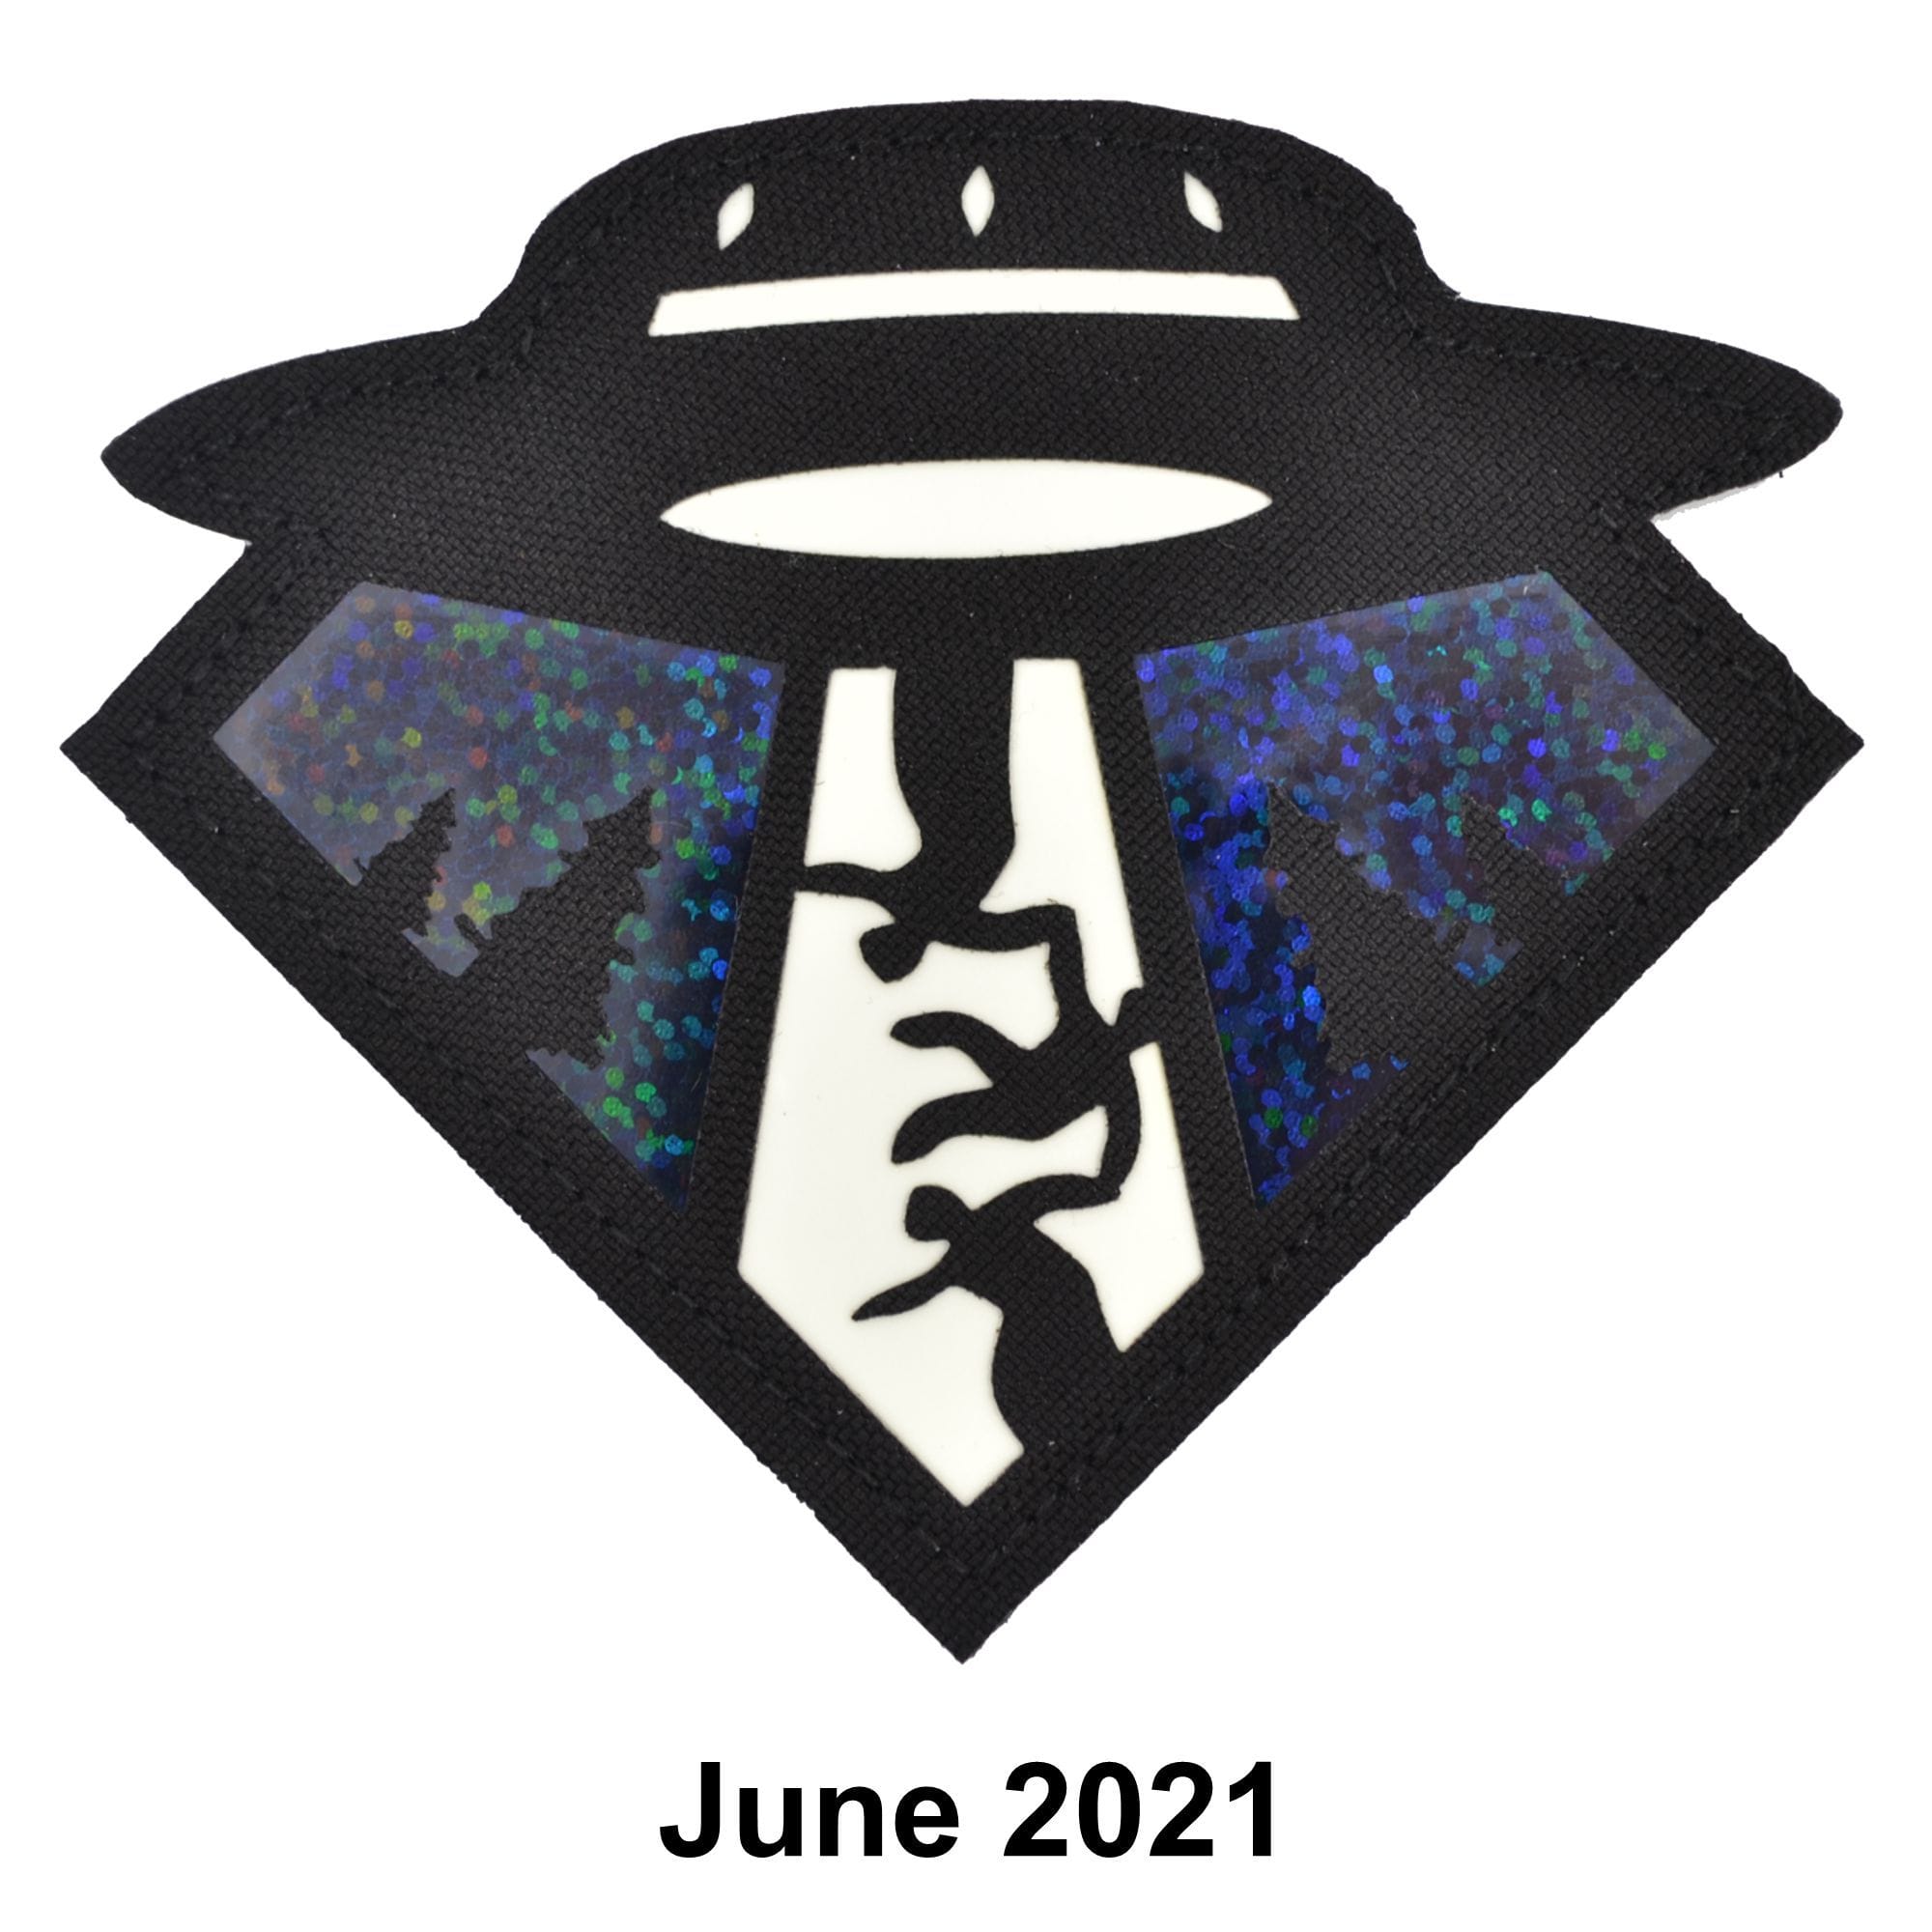 Tactical Gear Junkie Patches June 2021 Patch of the Month - UAP - Glow in the Dark